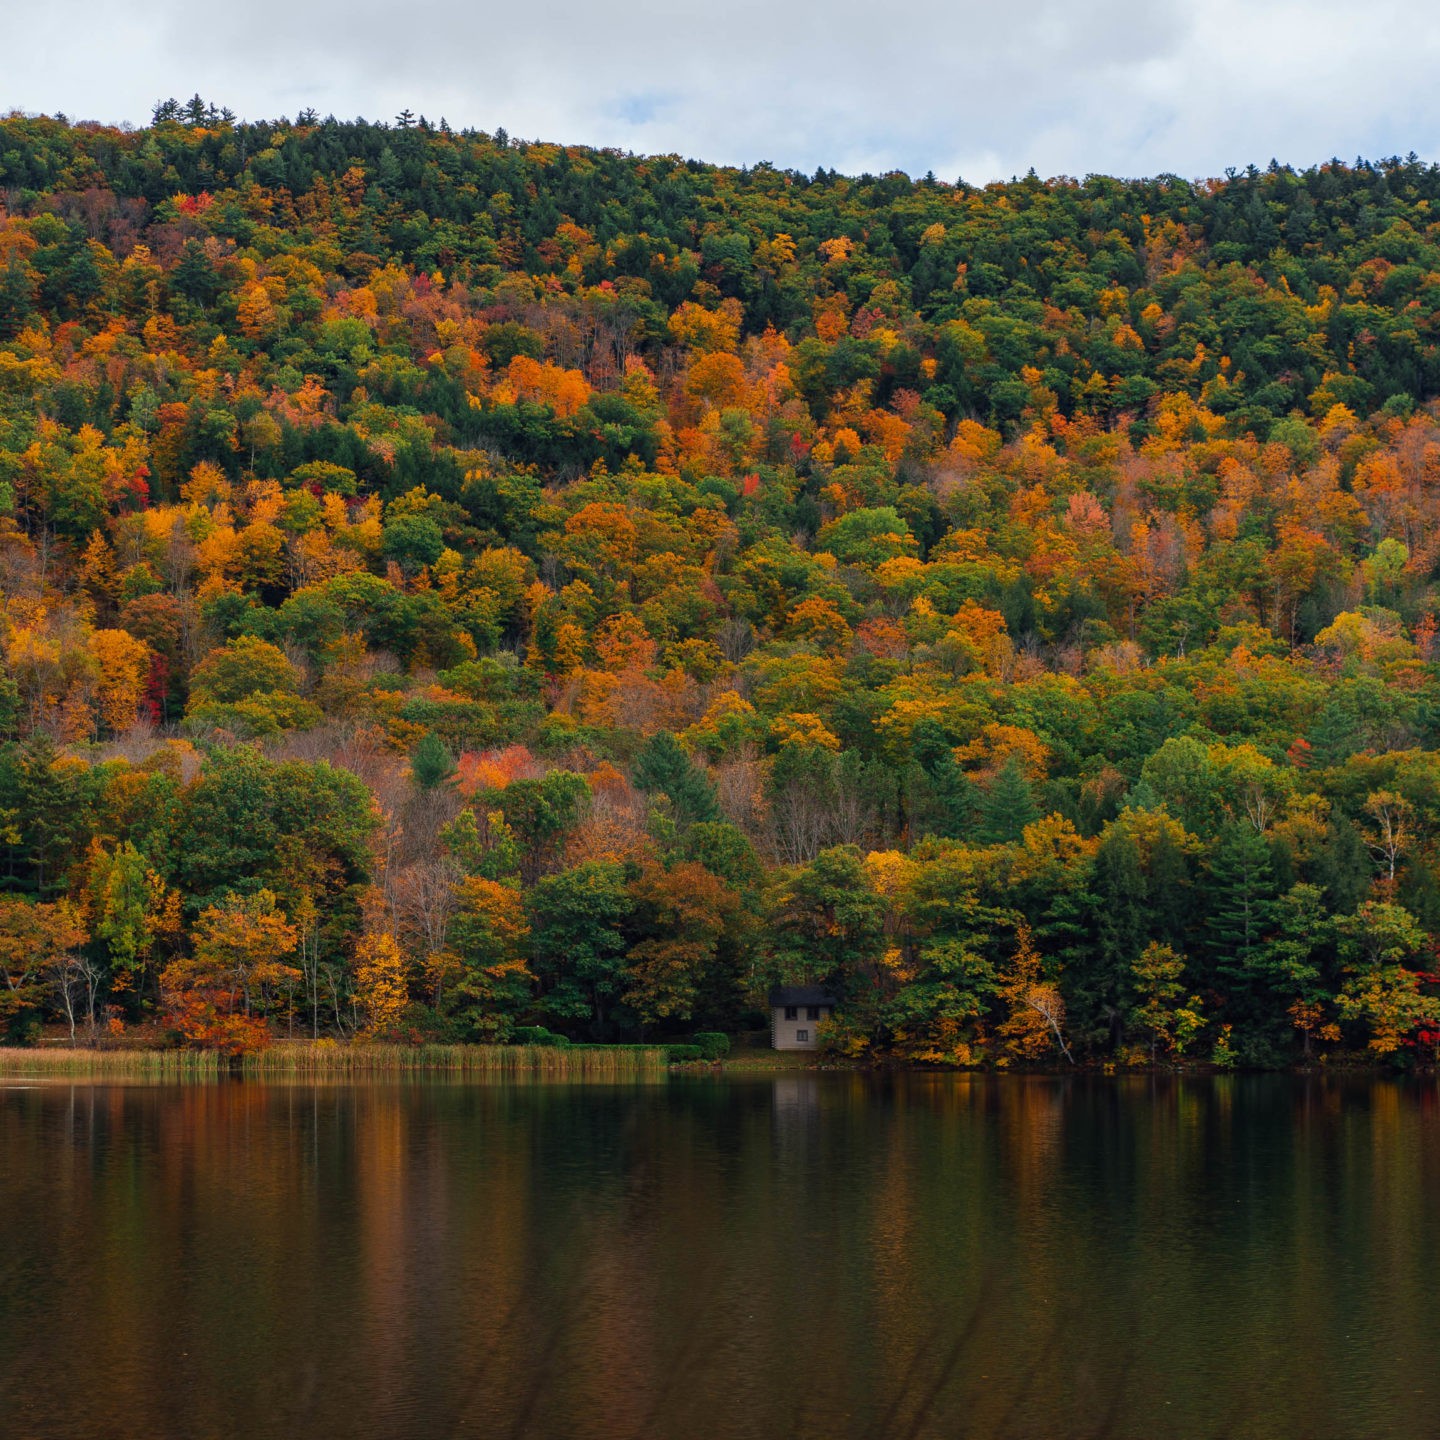 Jess Ann Kirby suggests seeing fall foliage in Woodstock, Vermont.